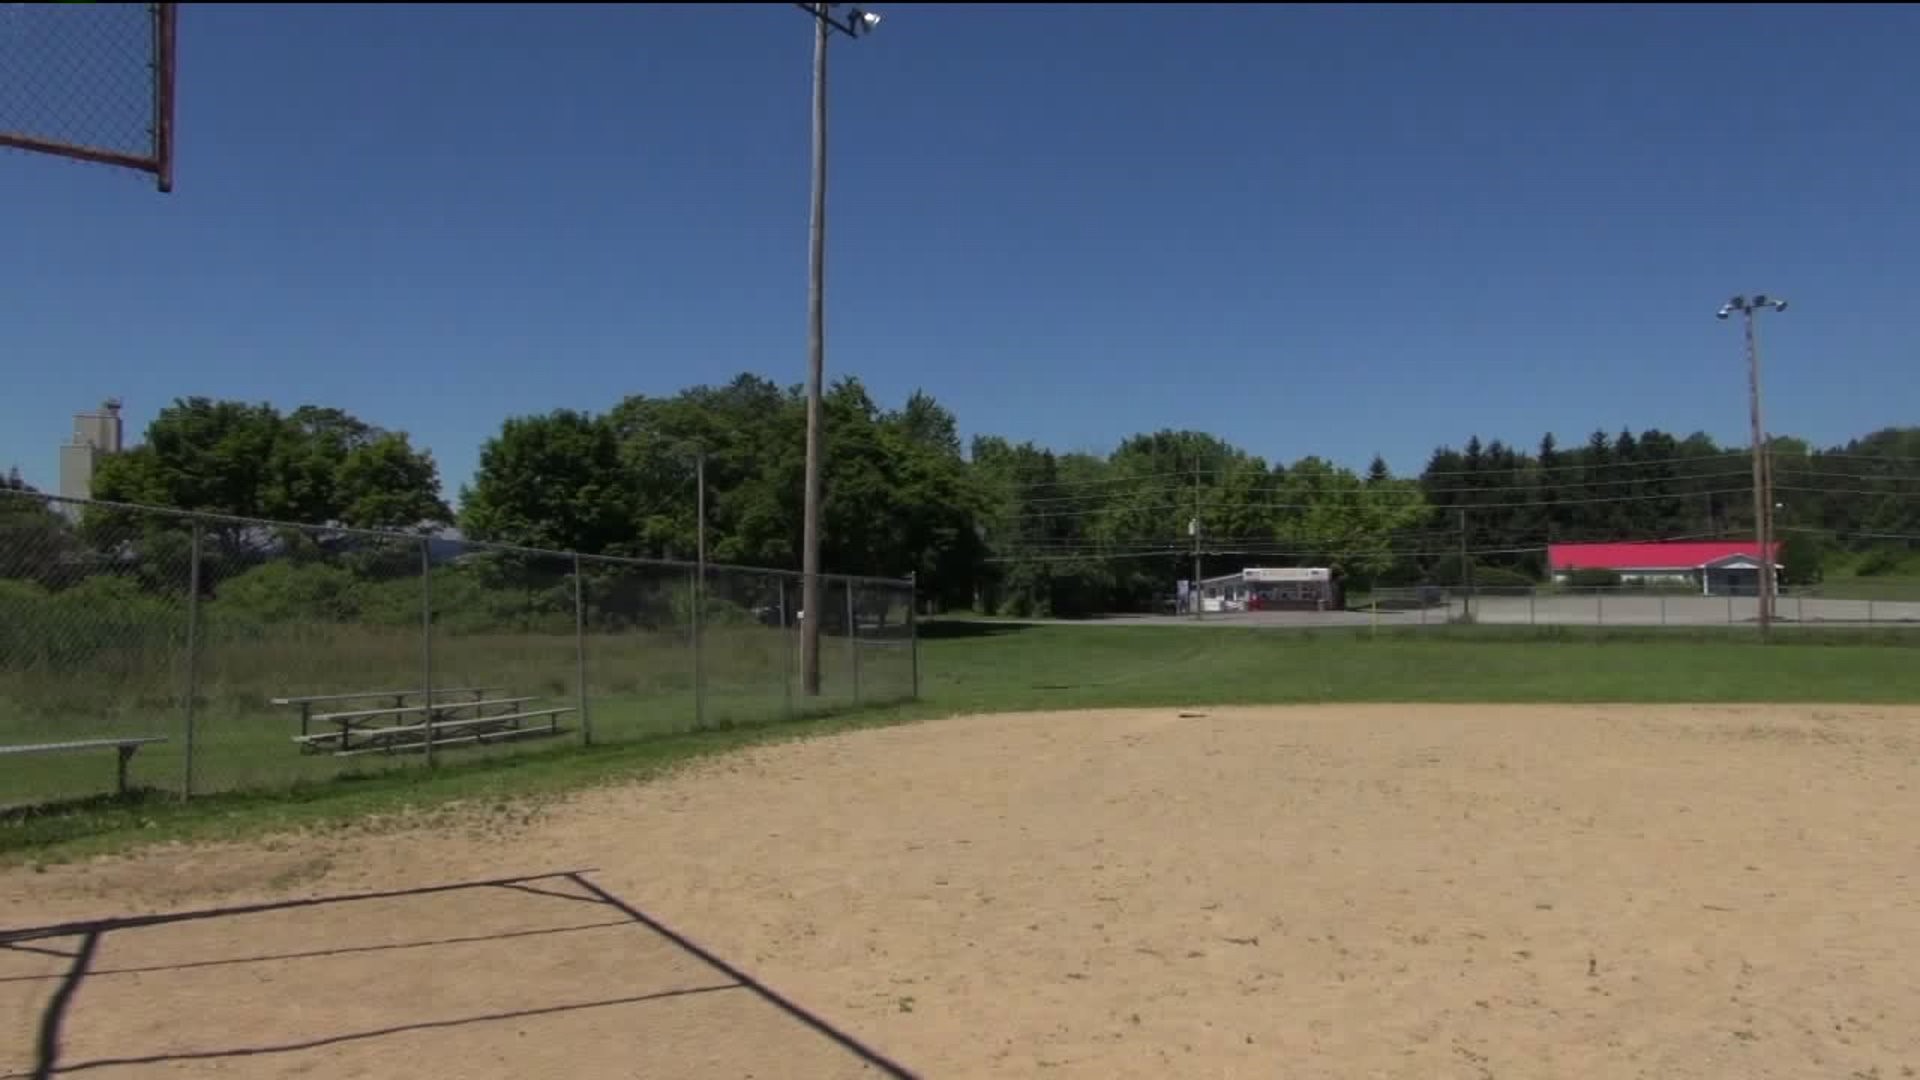 Concession Stand Fire Knocks Out Ball Field Lights